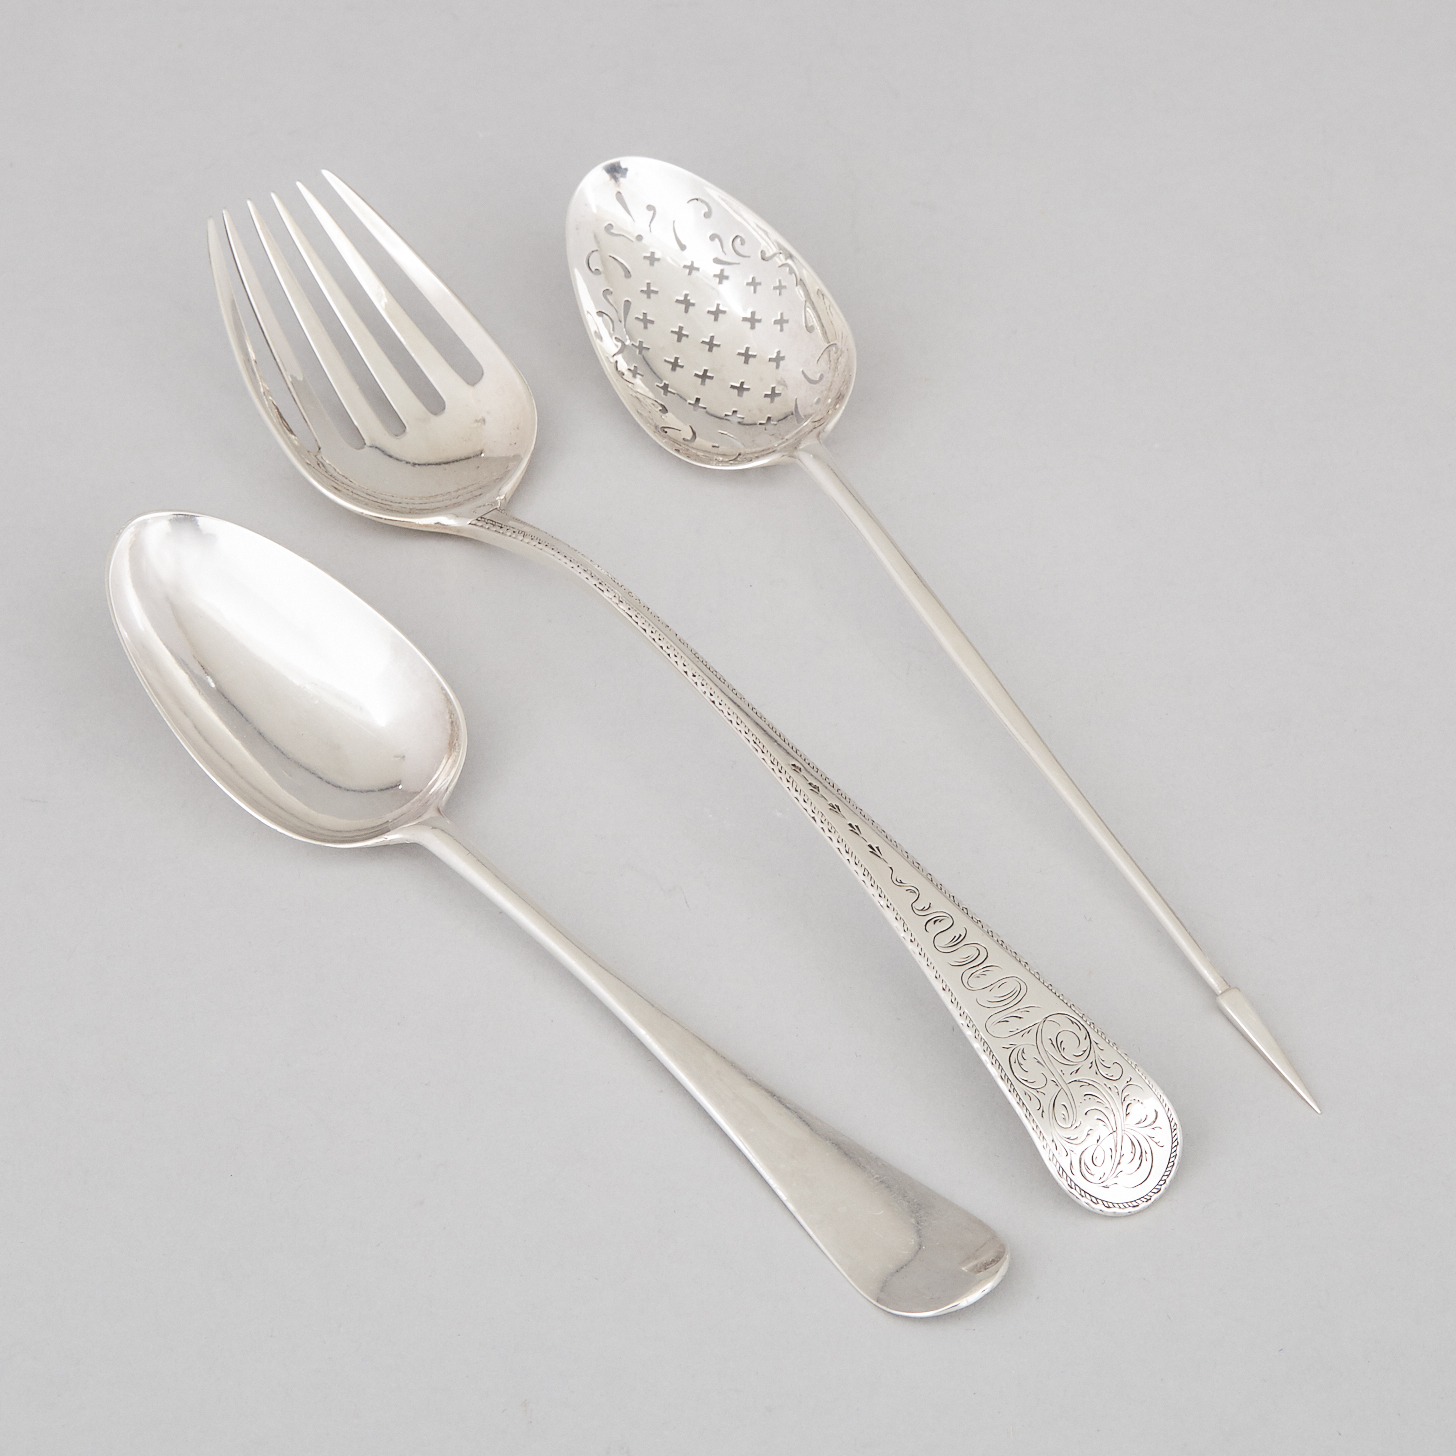 George III Silver Large Mote or Straining Spoon, William London, London, 1764, Scroll-Backed Hanoverian Pattern Table Spoon, 1764, and an Engraved Old English Pattern Serving Fork, Richard Crossley, 1792